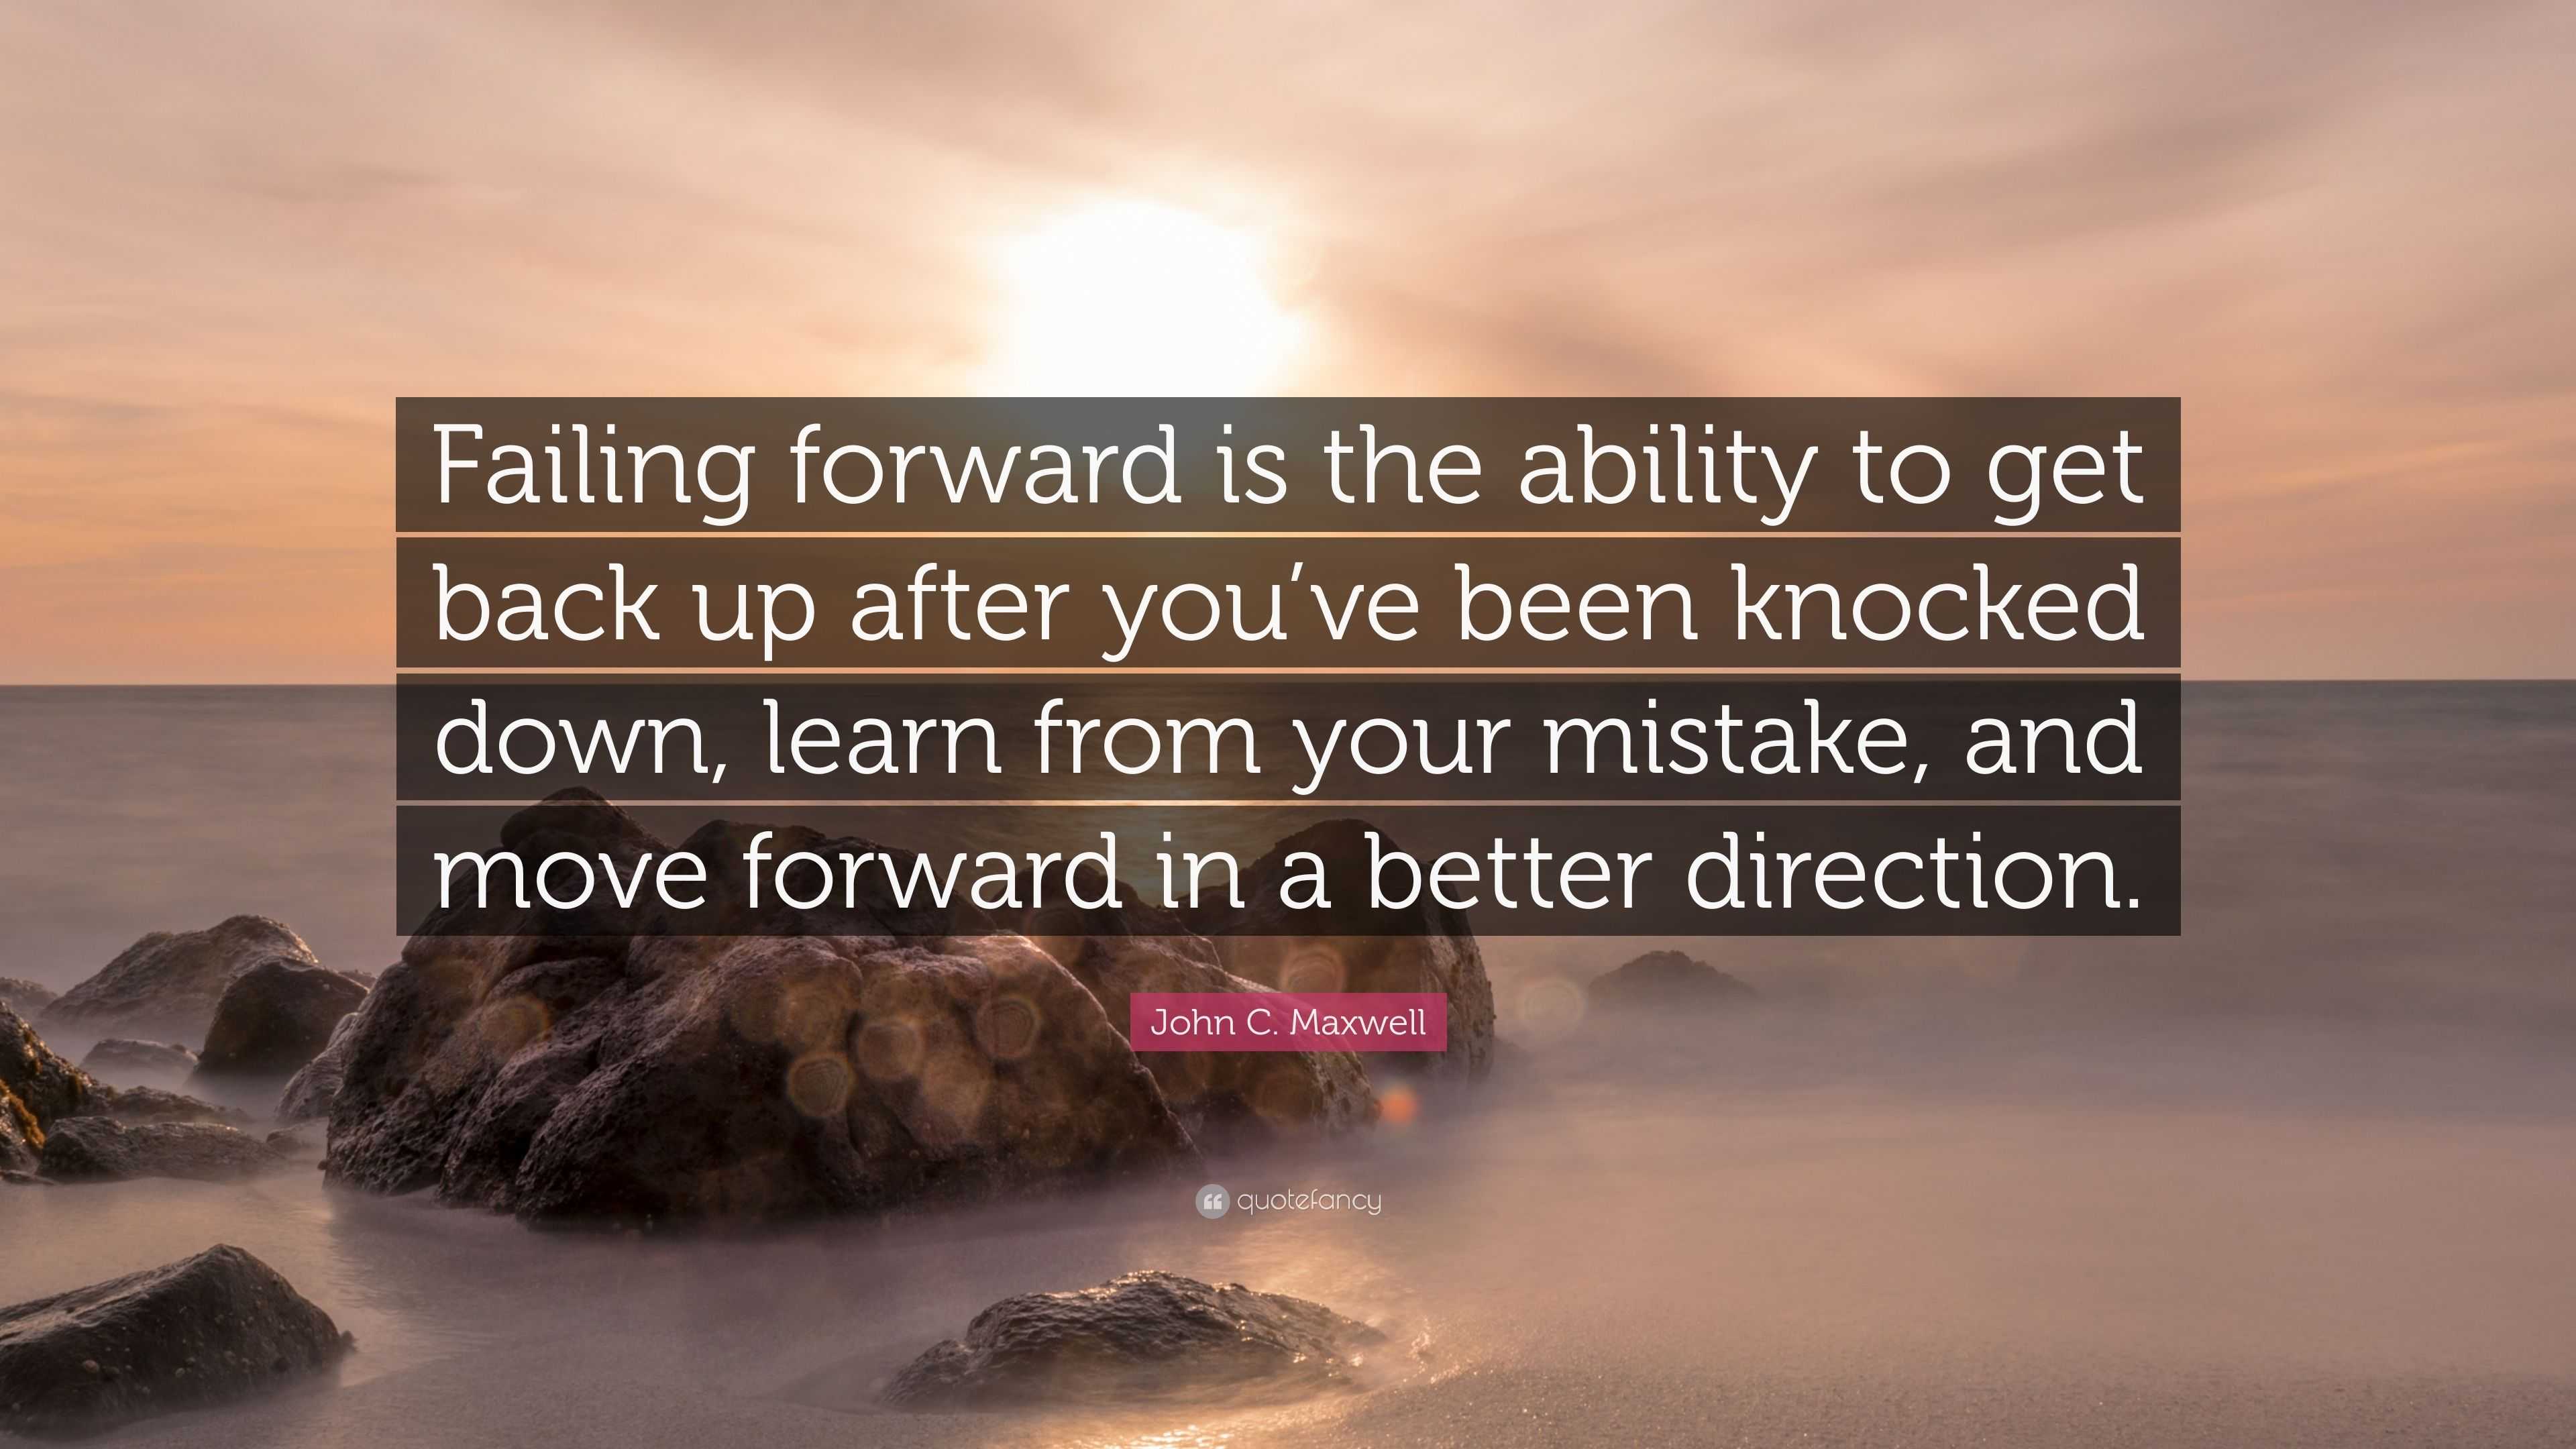 John C. Maxwell Quote: “Failing forward is the ability to get back up